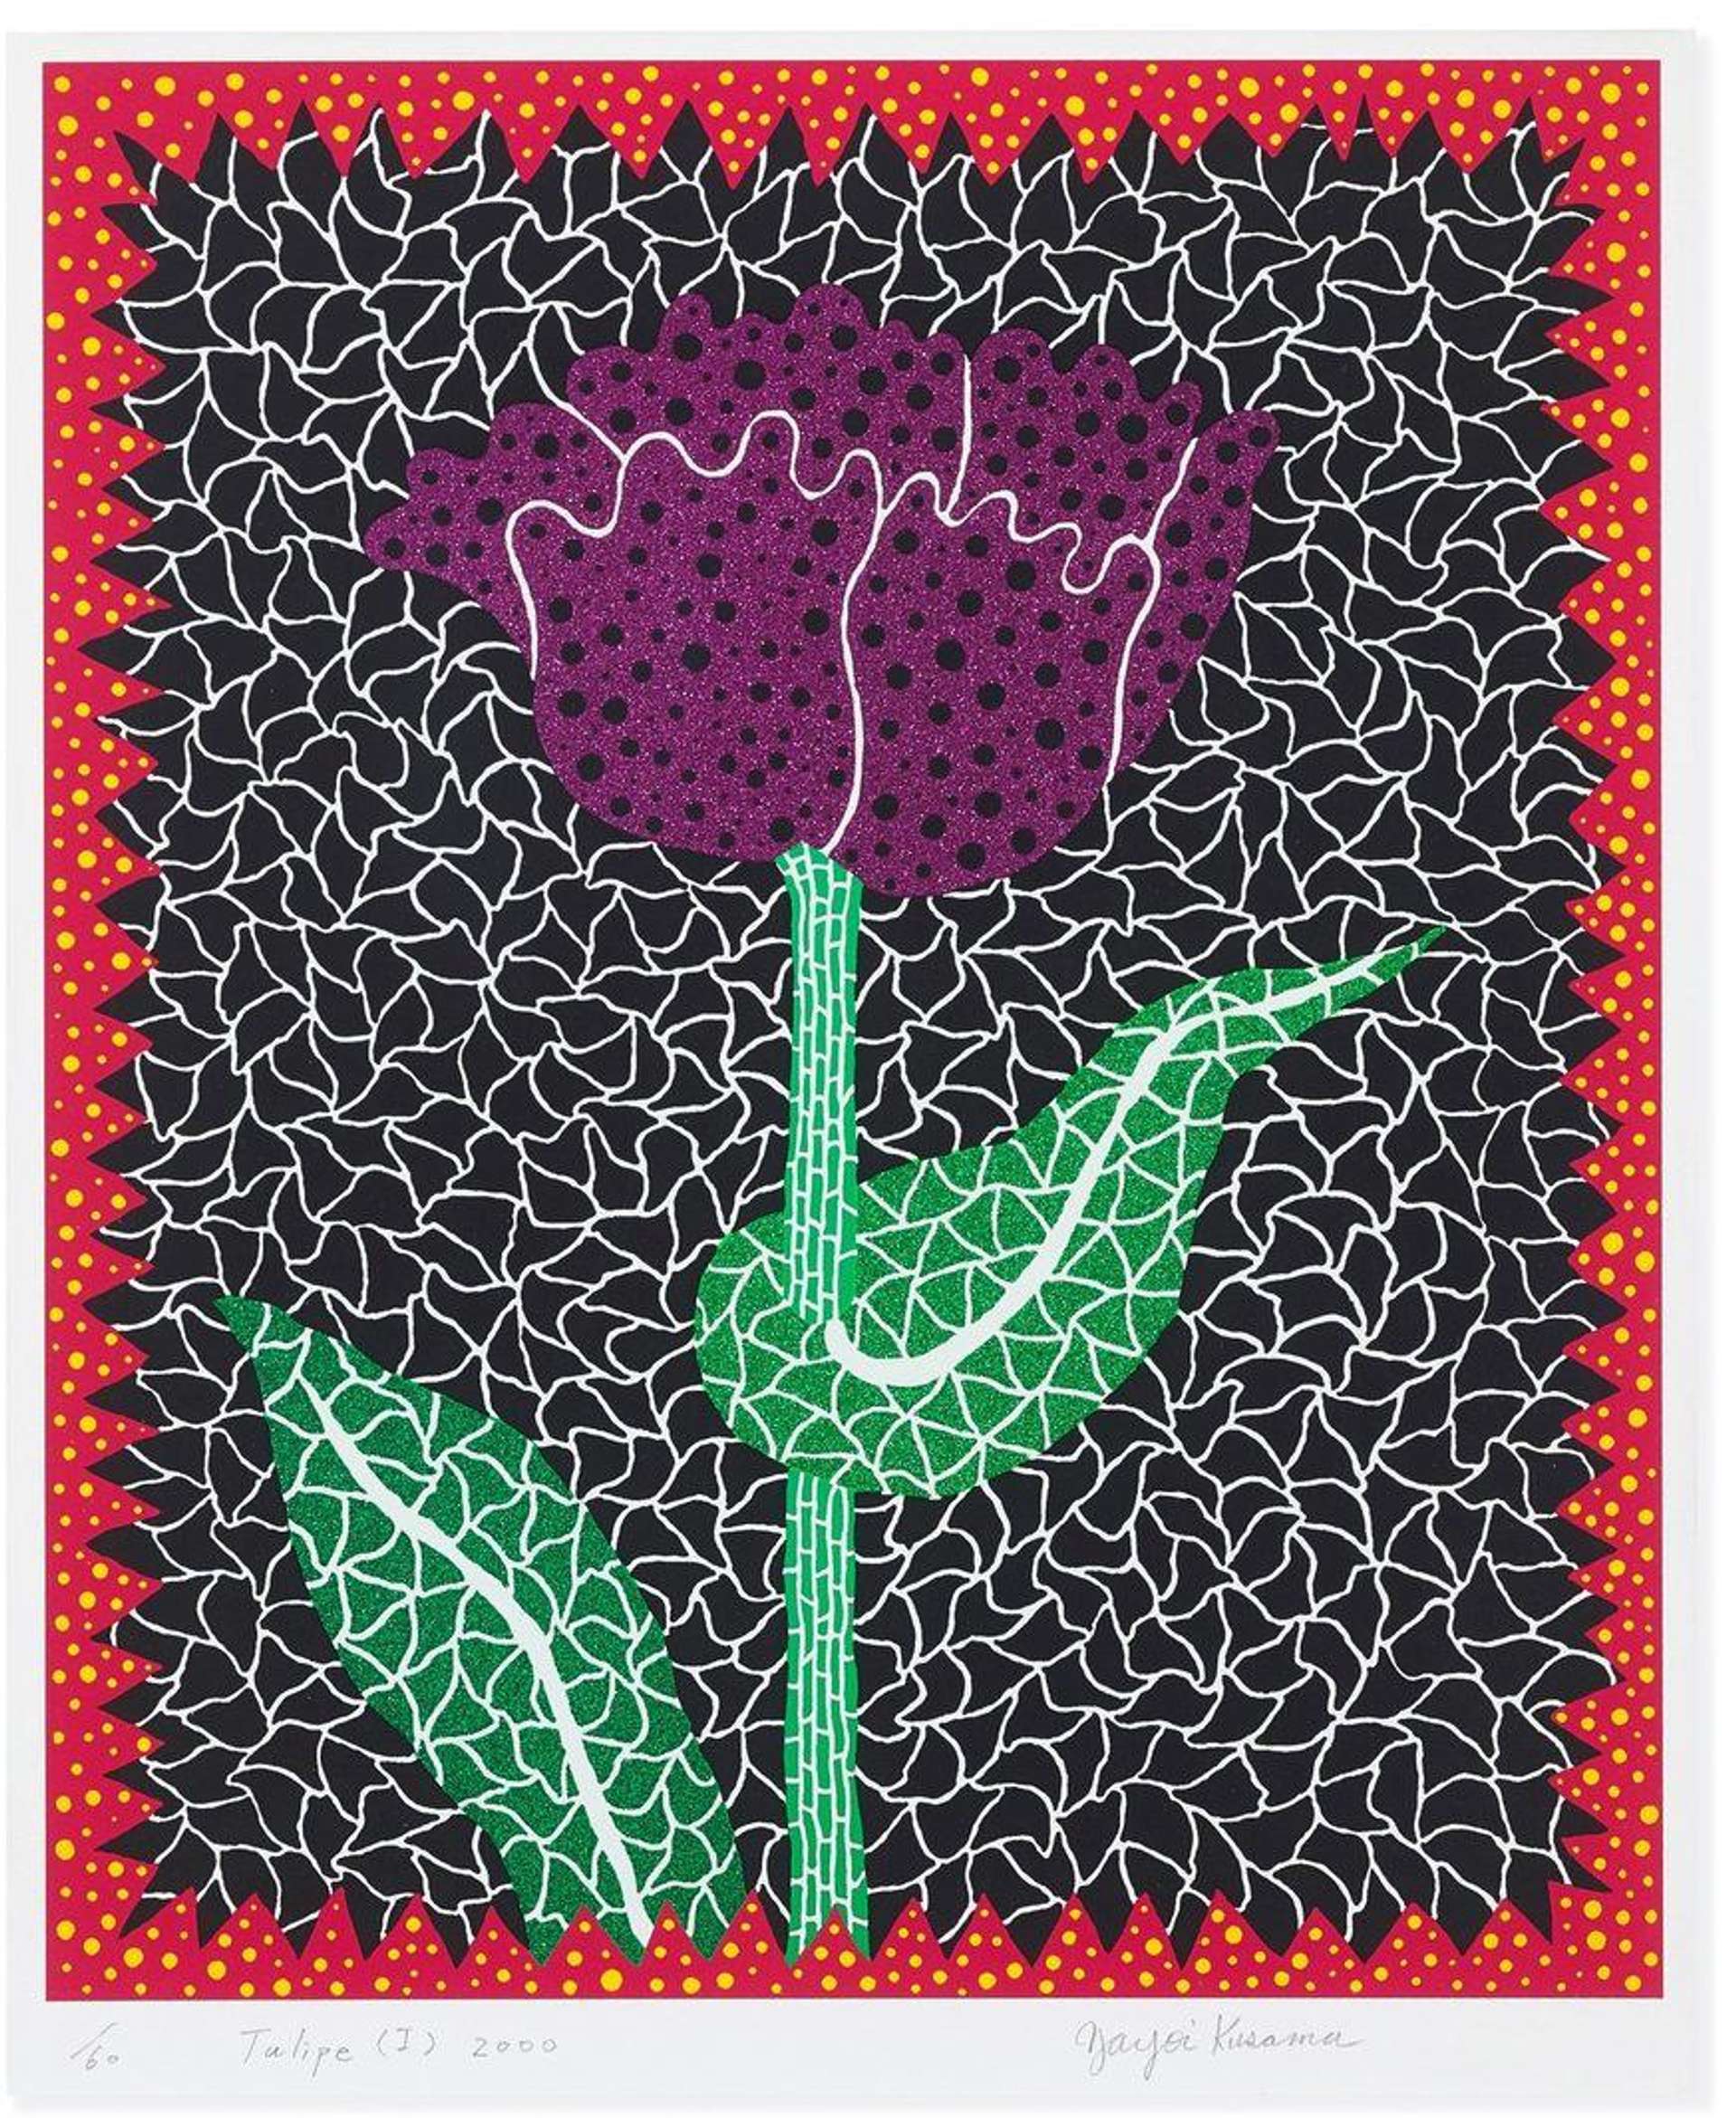 Yayoi Kusama’s Tulipe I. A screenprint of a purple tulip flower against black background with white geometric lines, with a red border that has yellow dots.